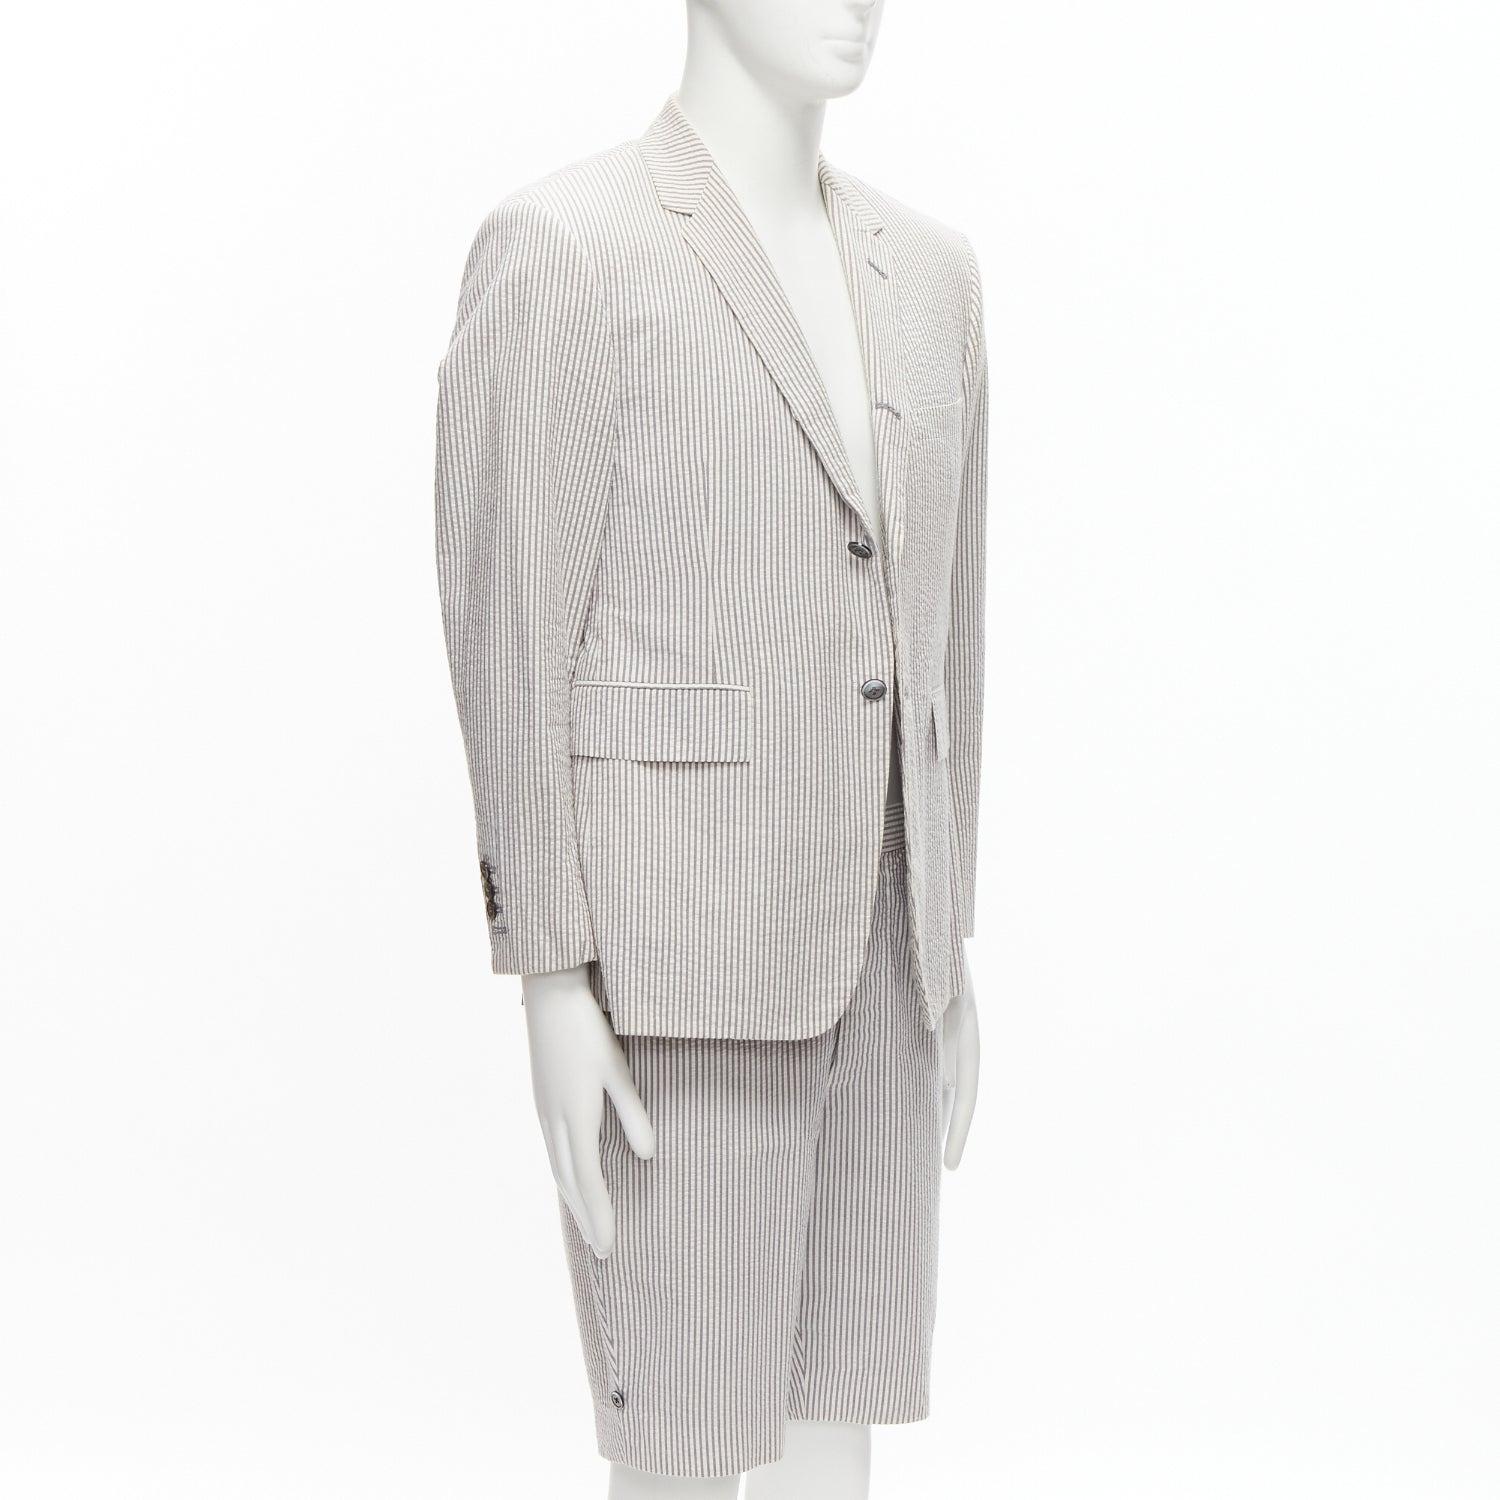 THOM BROWNE grey white striped seersucker blazer jacket shorts suit Sz. 3 L In Good Condition For Sale In Hong Kong, NT